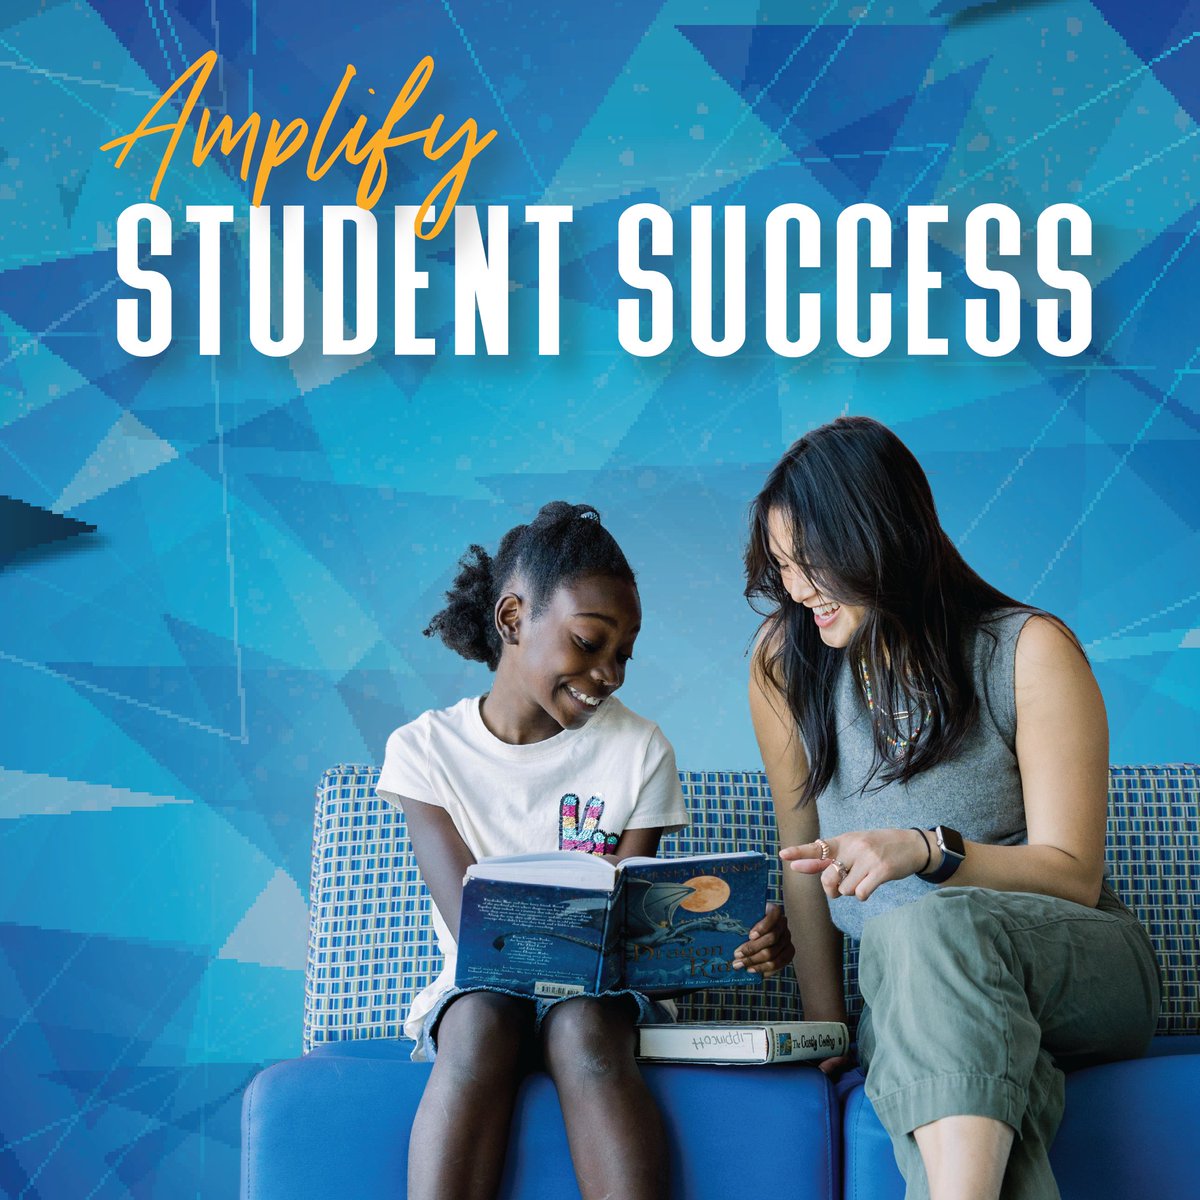 As students across the country head #BacktoSchool, it's so important that we check in to ensure that their social &emotional needs, alongside their academic ones, are being met. To learn how #MentoringAmplifies student success, visit:mentoring.org/back-to-school @MENTORnational